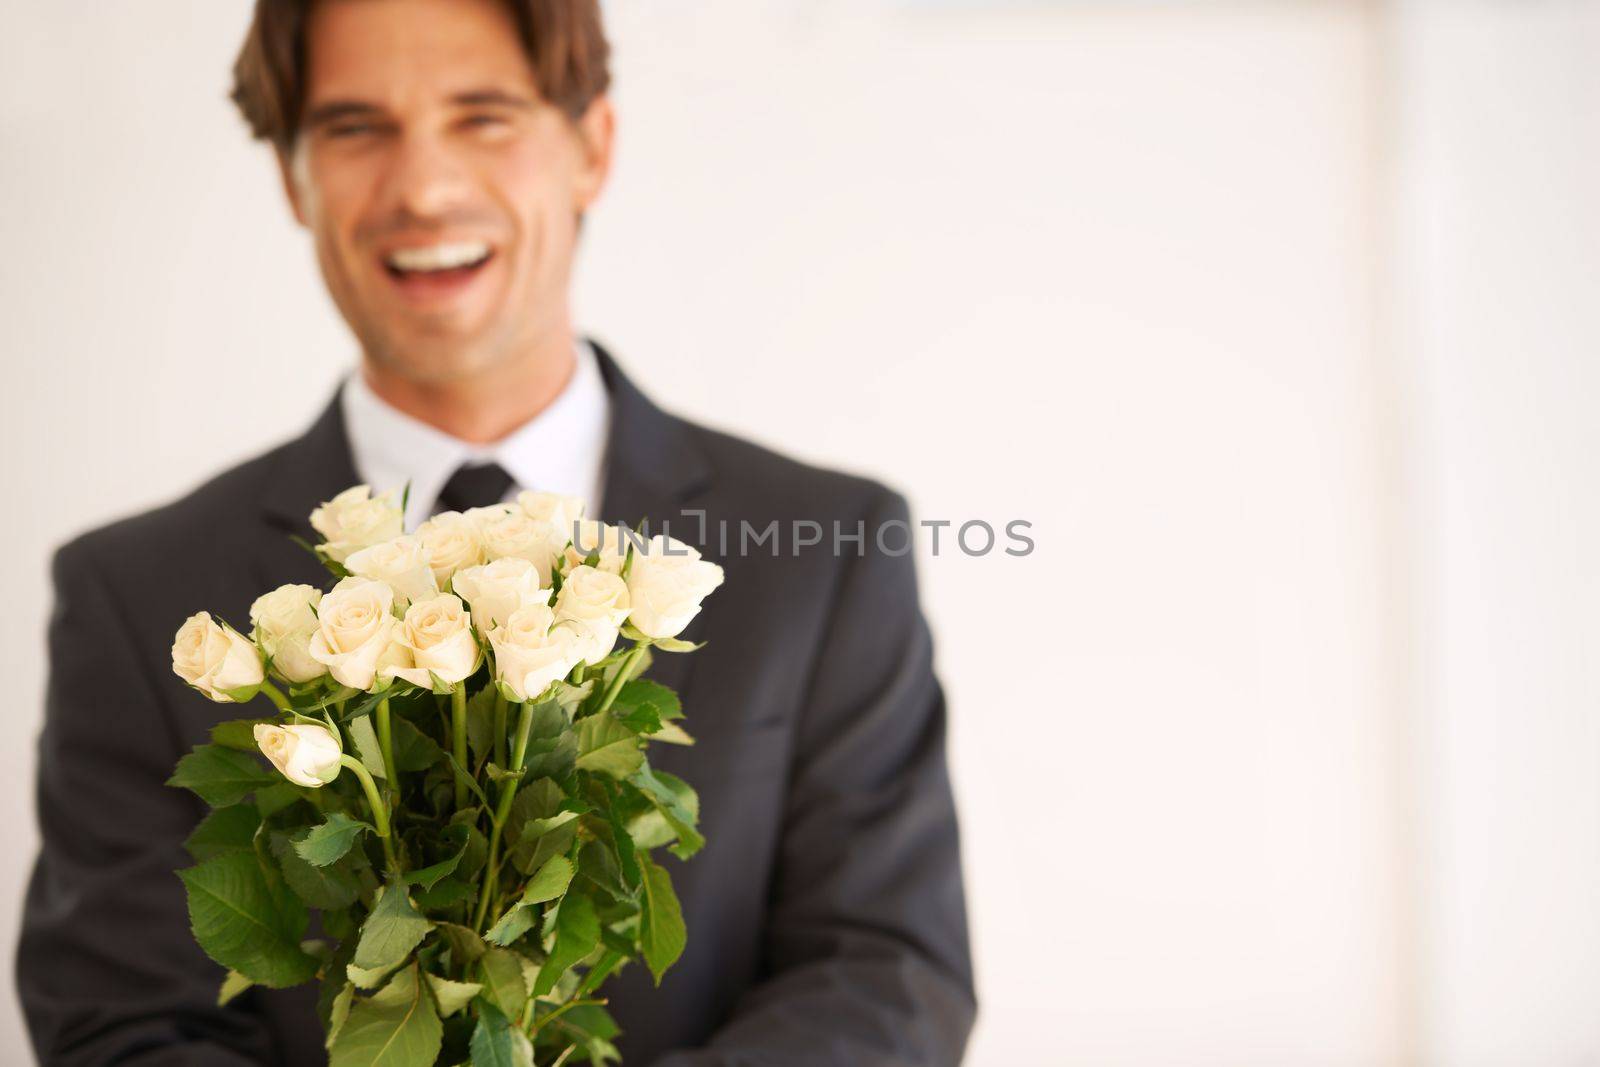 He is the romantic type. Portrait of a handsome young man wearing a suit and holding a bunch of roses